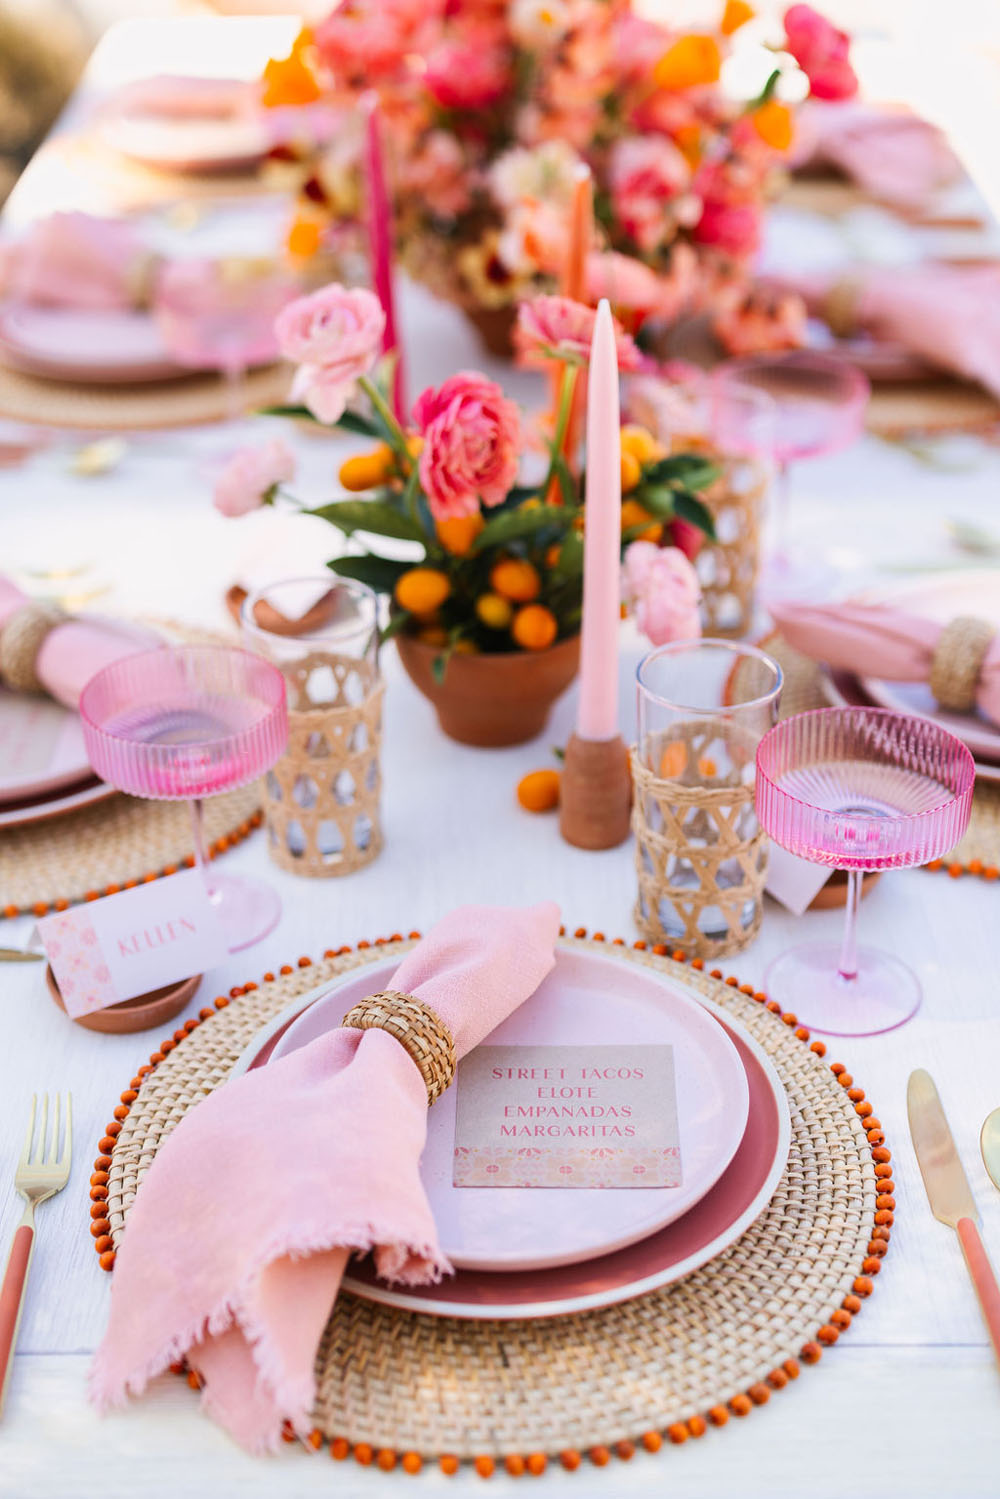 Pink place settings for Cinco de Mayo party from Beijos Events